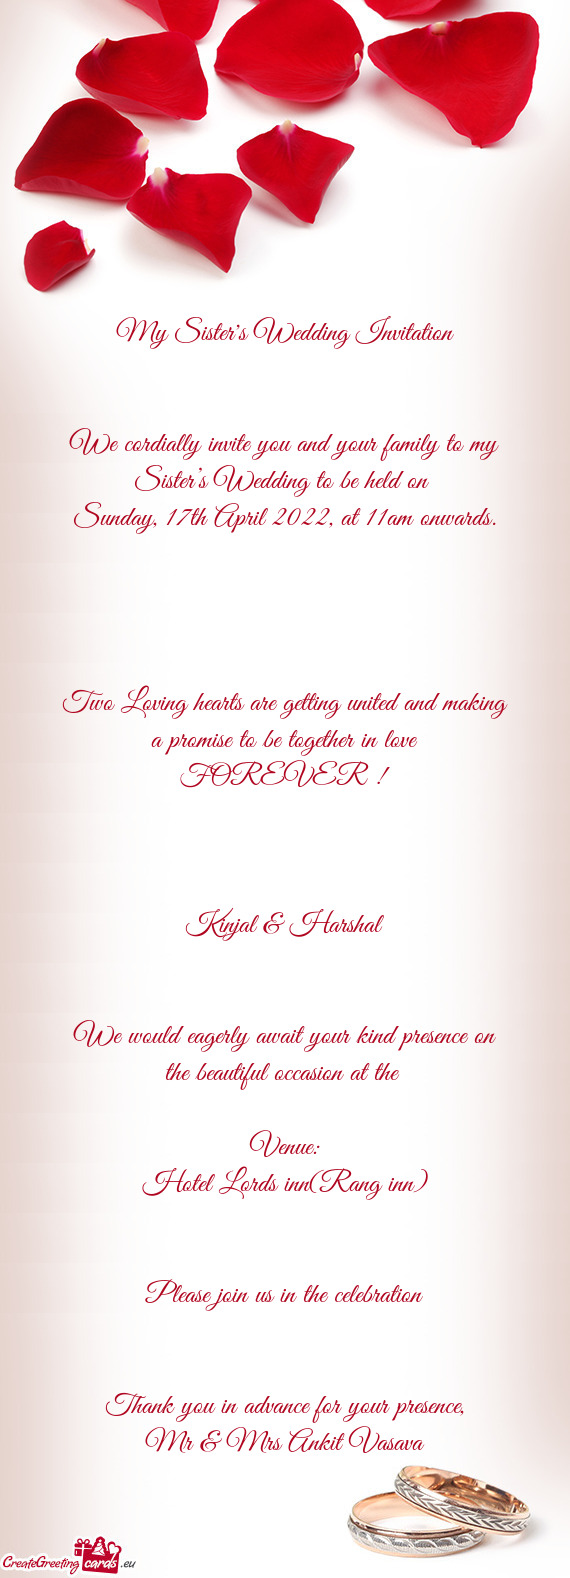 We cordially invite you and your family to my Sister’s Wedding to be held on